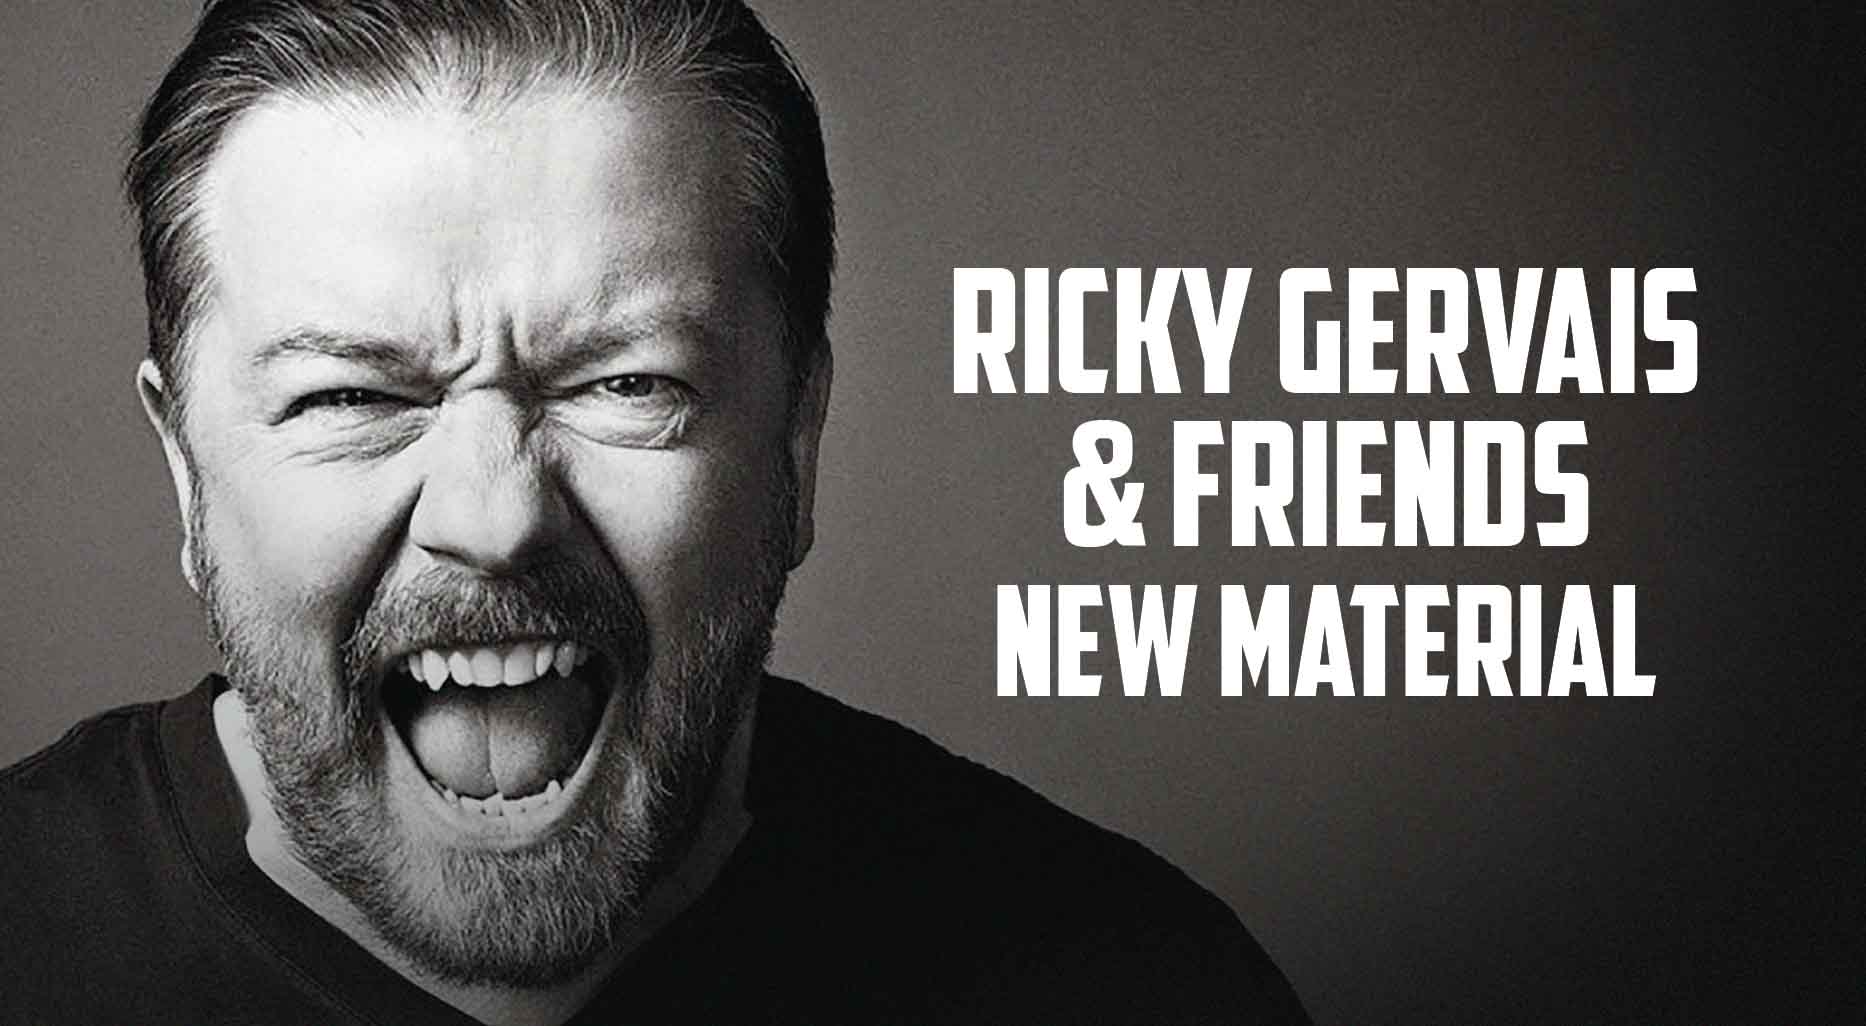 Ricky Gervais & Friends New Material promotional banner